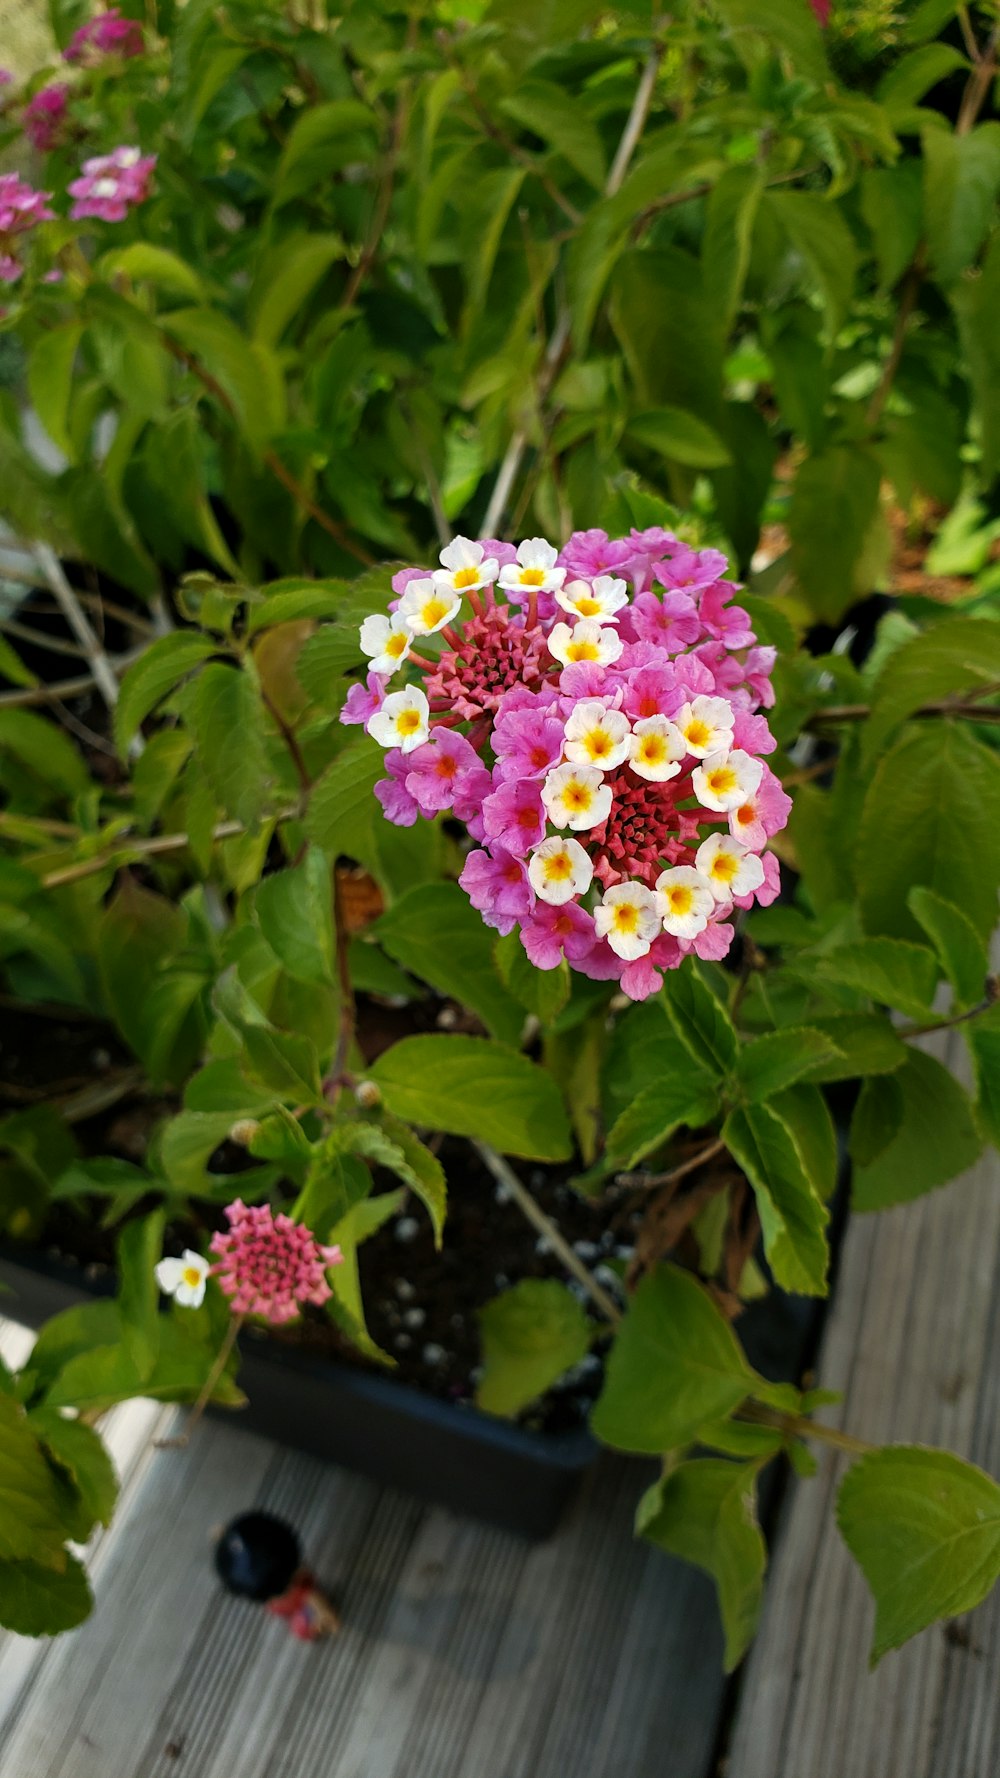 pink and white flower in bloom during daytime